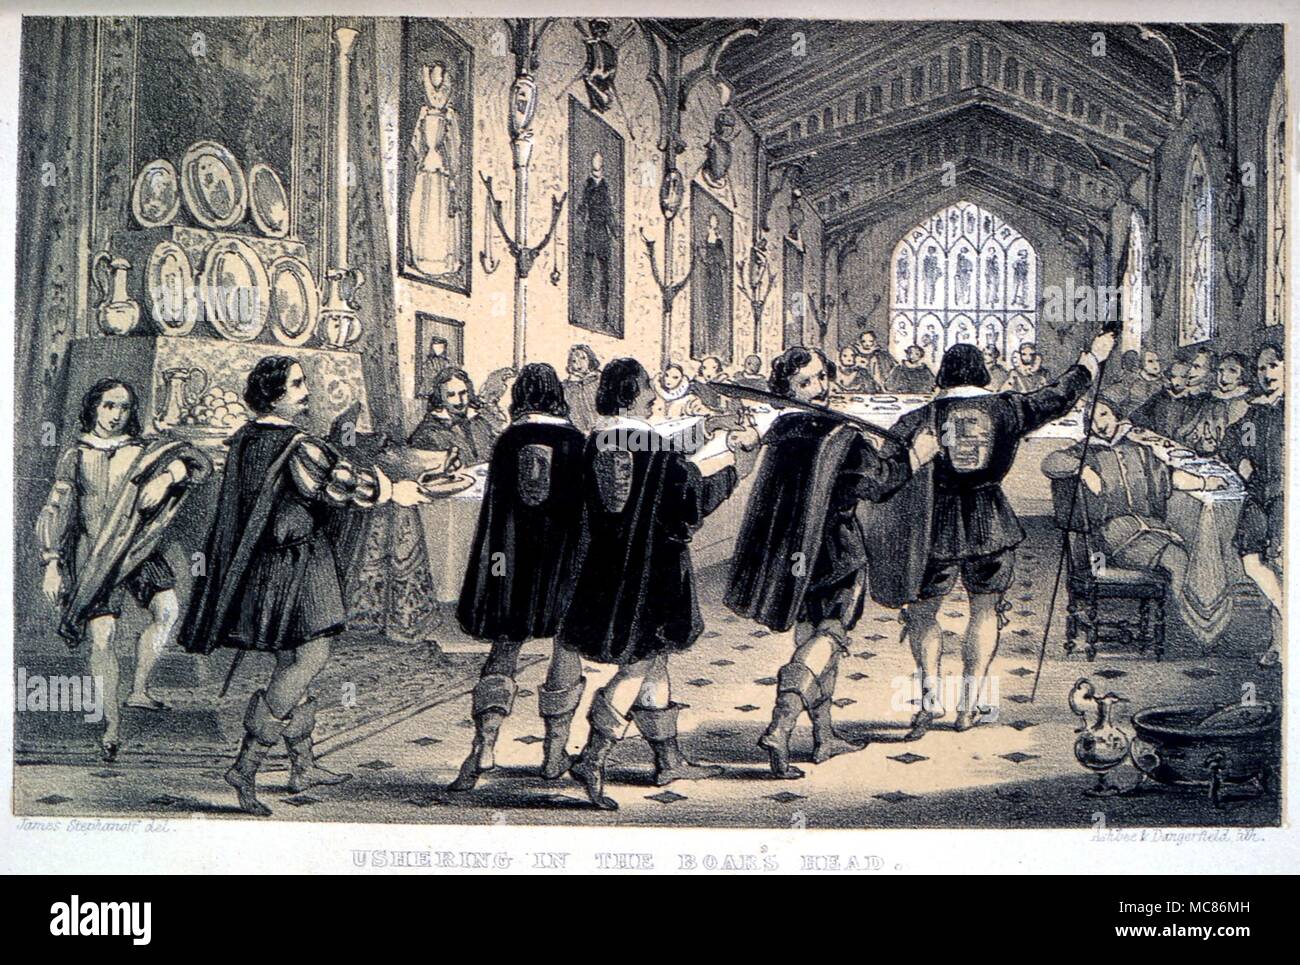 Christmastide festival of carrying in the Boar's Head in a great hall. Chromo woodcut from the William Sandys 'Christmastide, its History, Festivities and Carrols'. 1870 Stock Photo